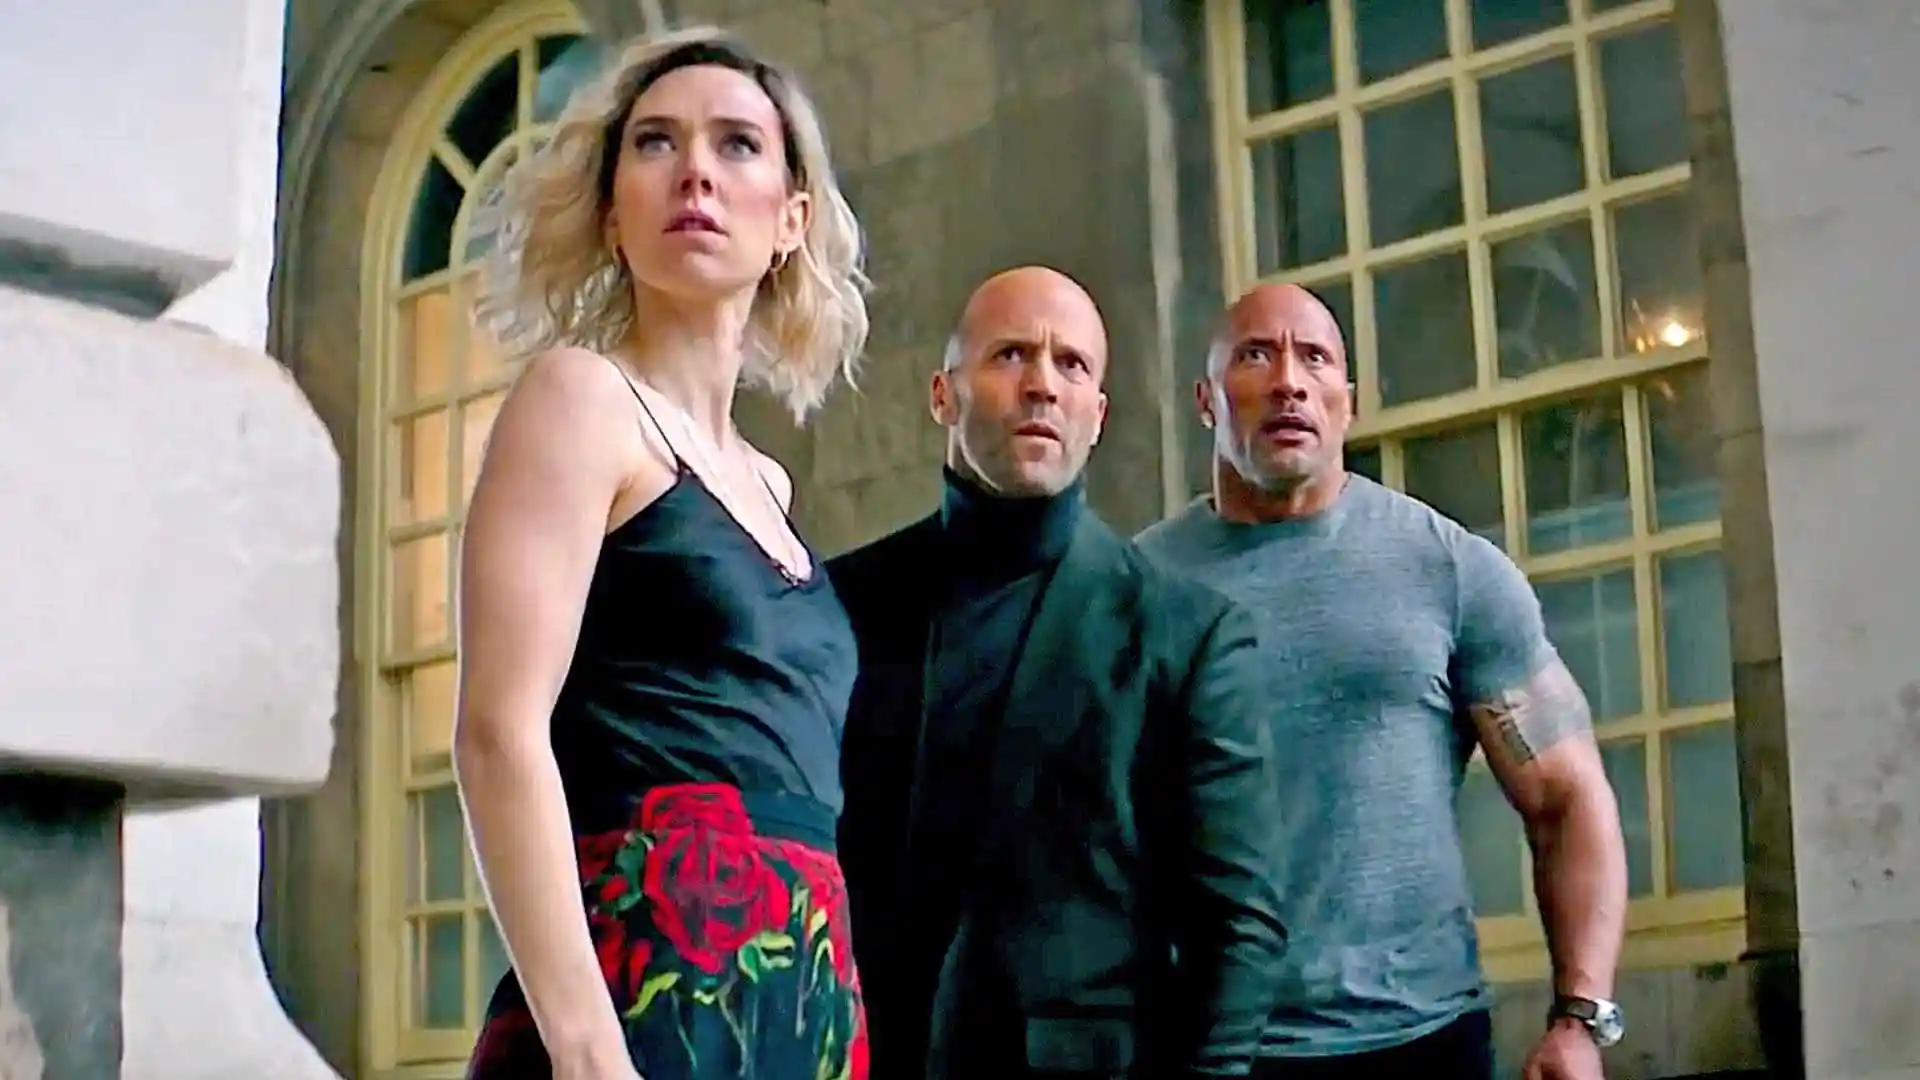 Hobbs & Shaw 2 Is Officially Happening According to Dwayne Johnson